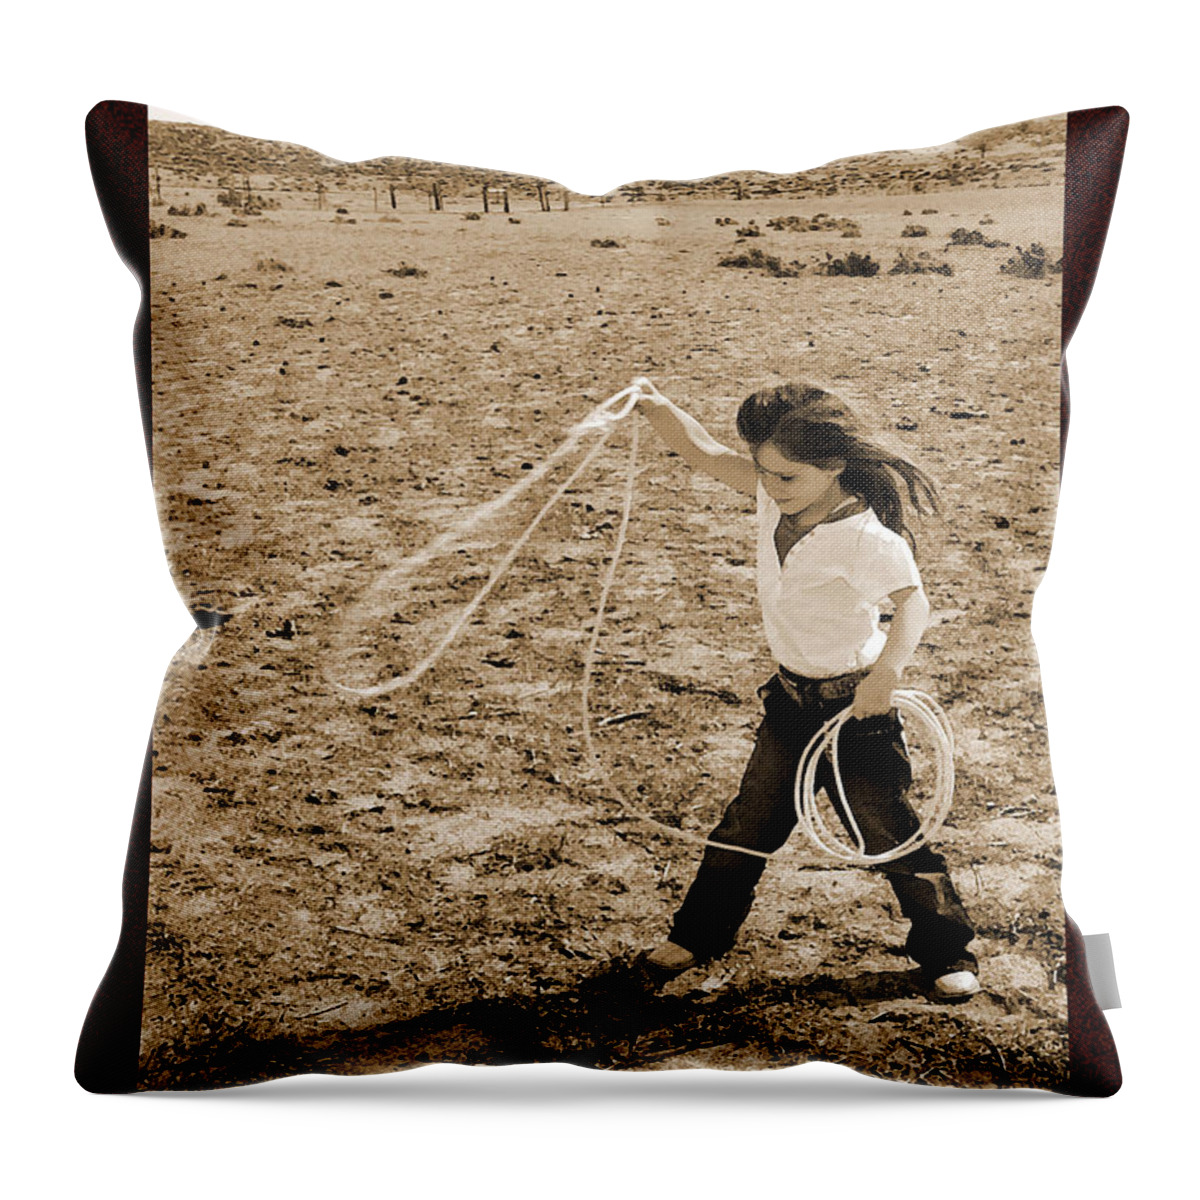 Uplifting Throw Pillow featuring the mixed media Western Themed Uplifting Greeting Card by Amanda Smith